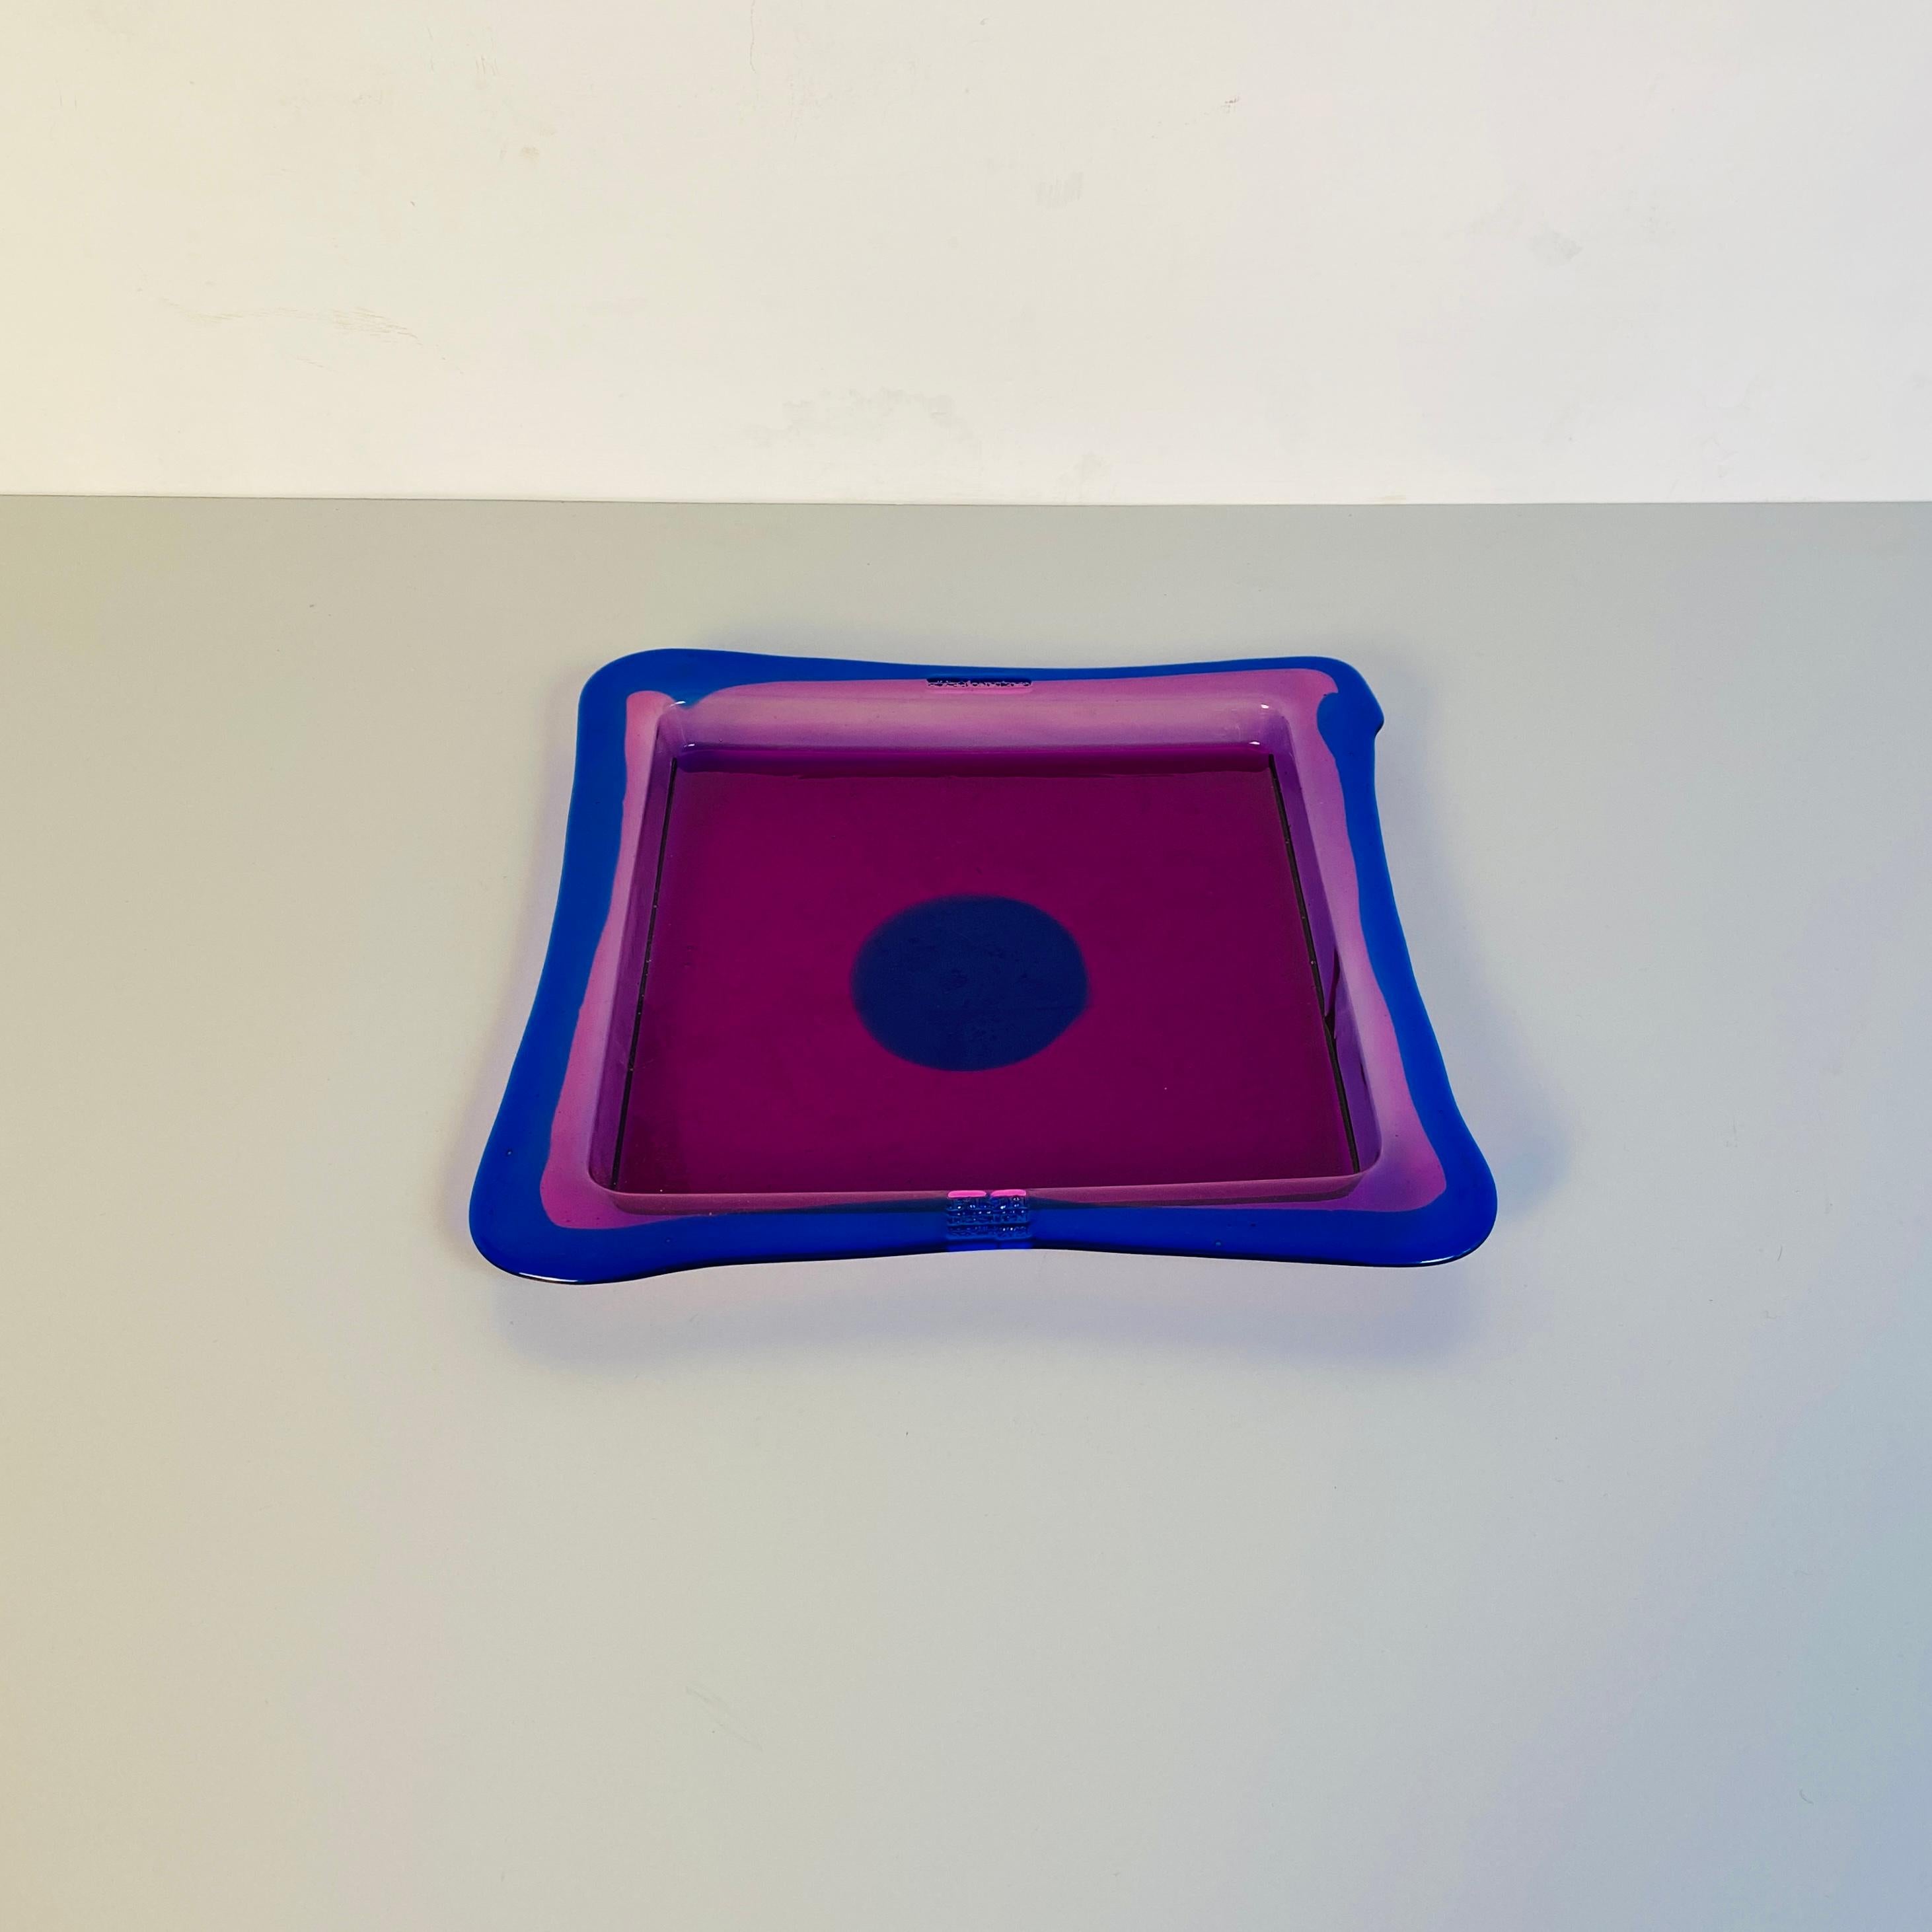 Modern Italian Resin Tray Mod, Try Tray Square by Gaetano Pesce for Fish Design, 2018